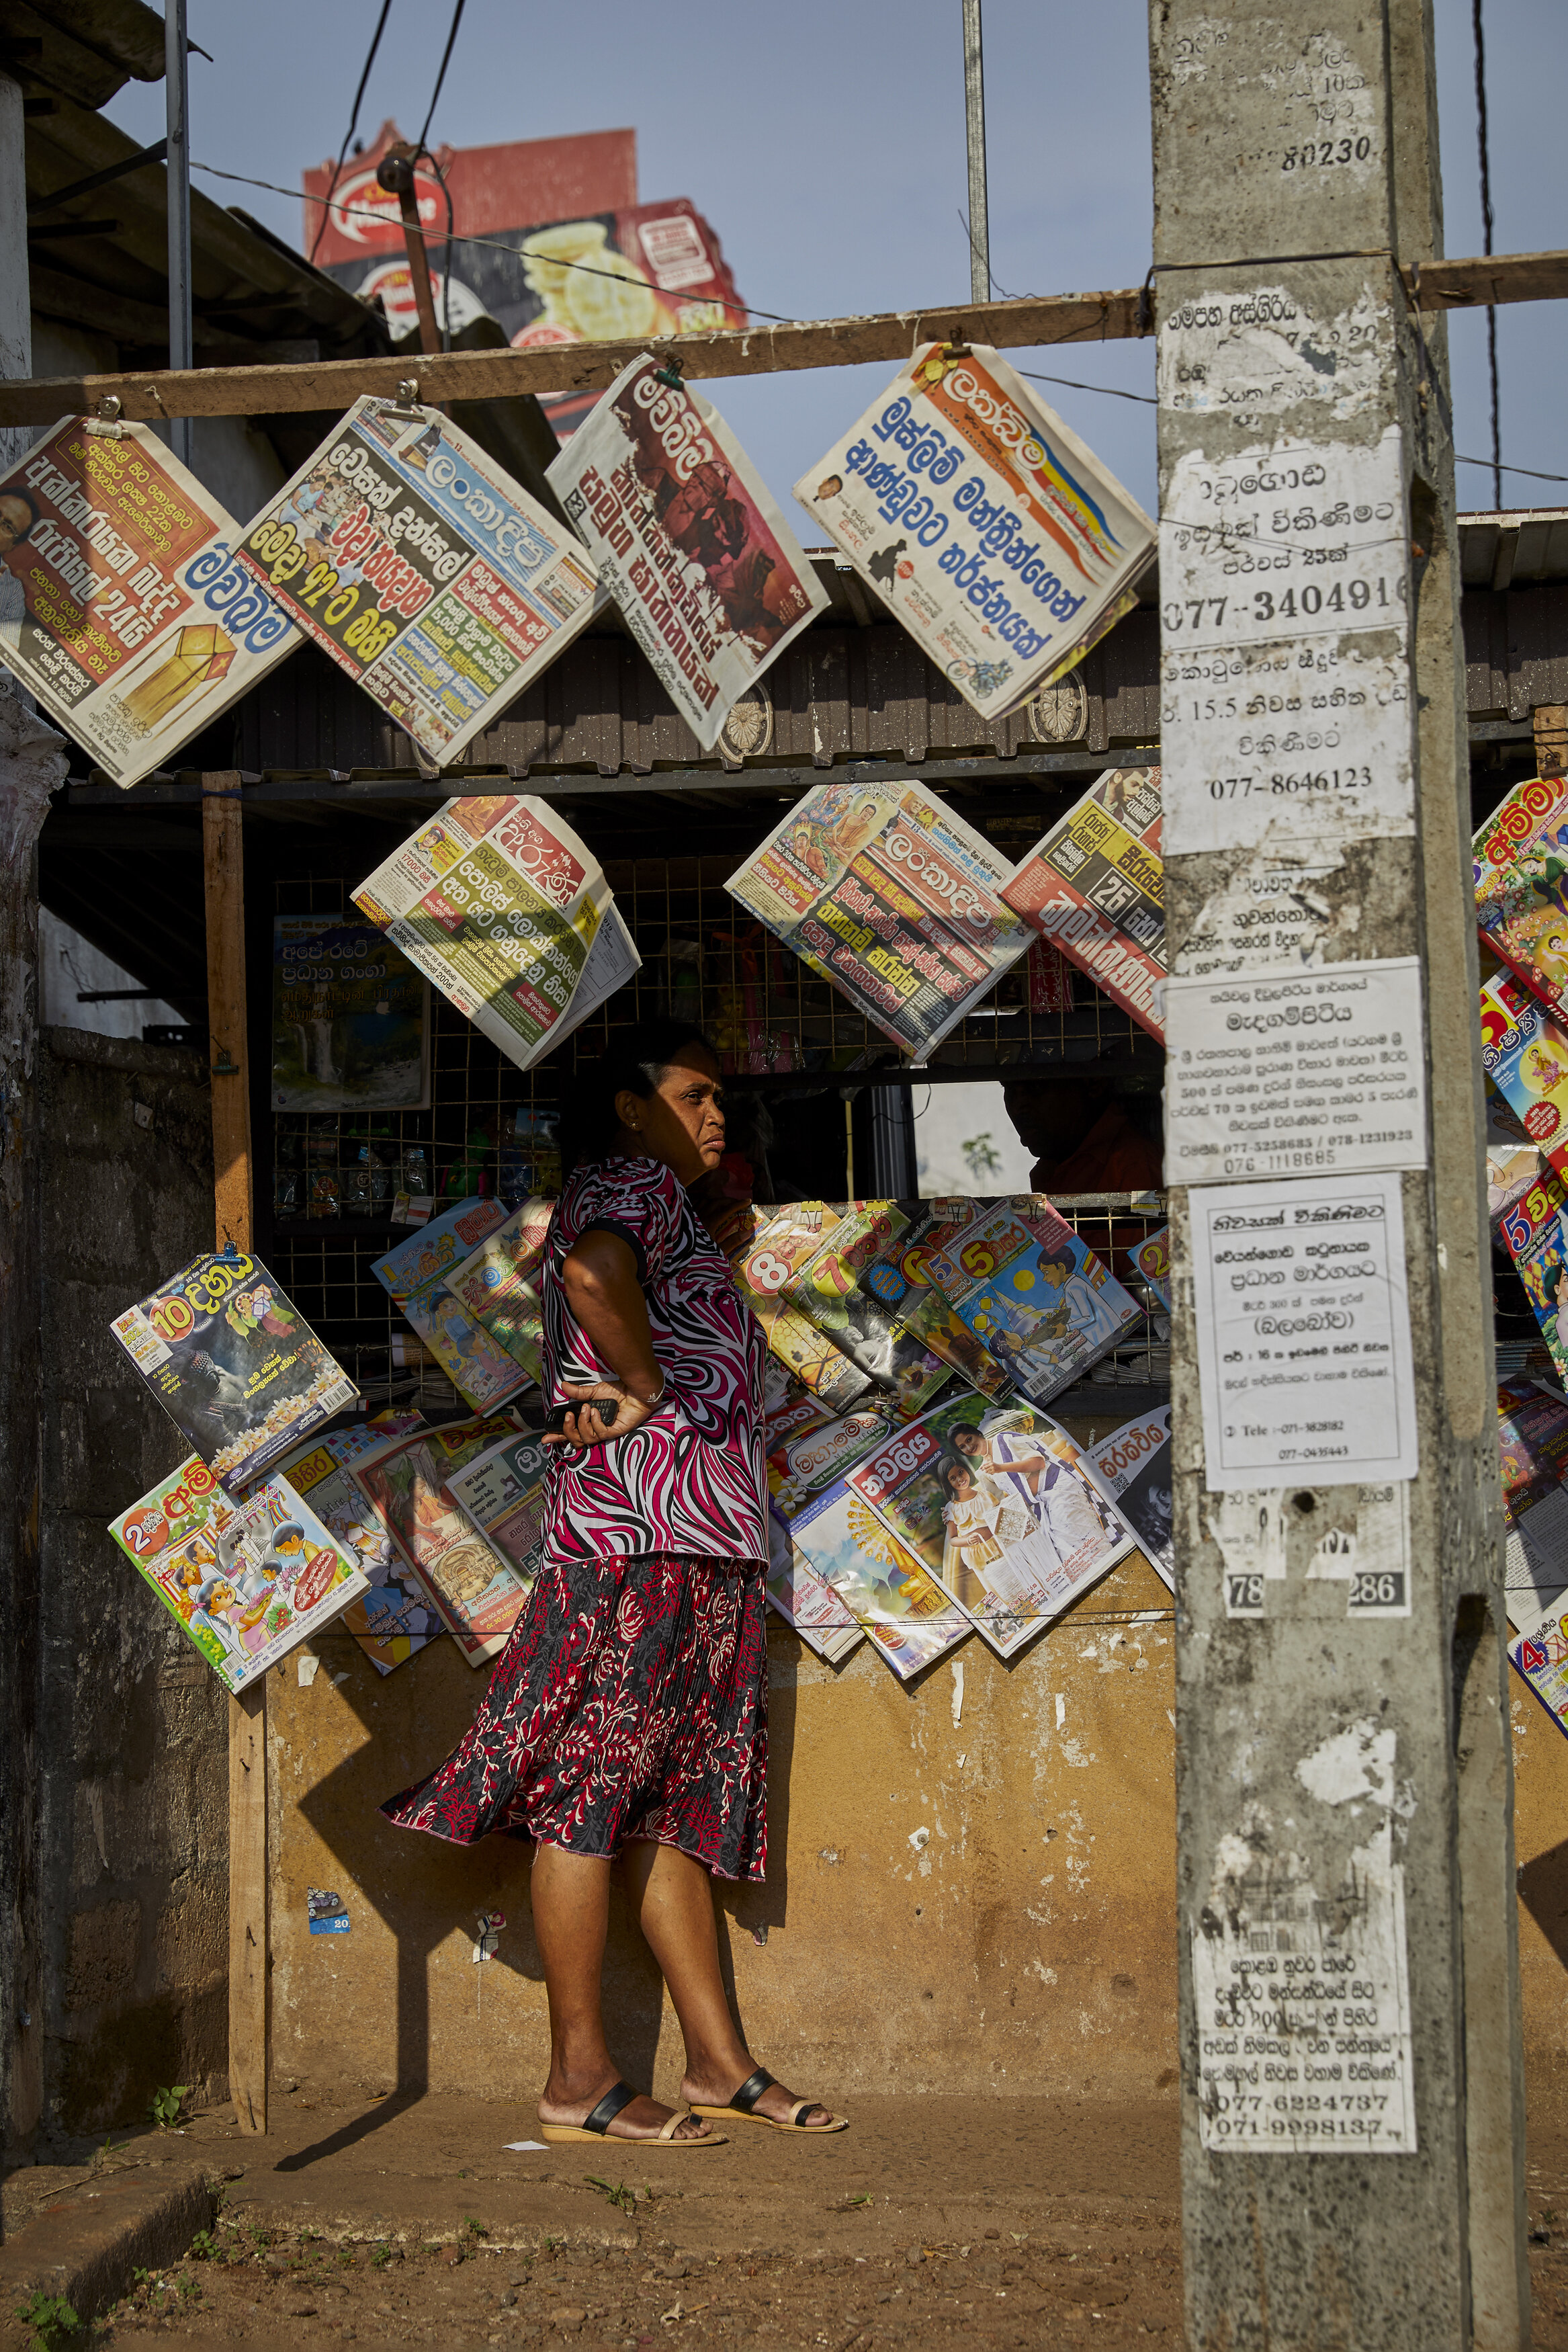  A woman stands at a newsstand days after the Easter Sunday Bombings, with headlines that decry the tragedies. In retaliation for the bombings, people began looting mosques and Muslim-run businesses, with a nationwide curfew enacted for weeks to try 